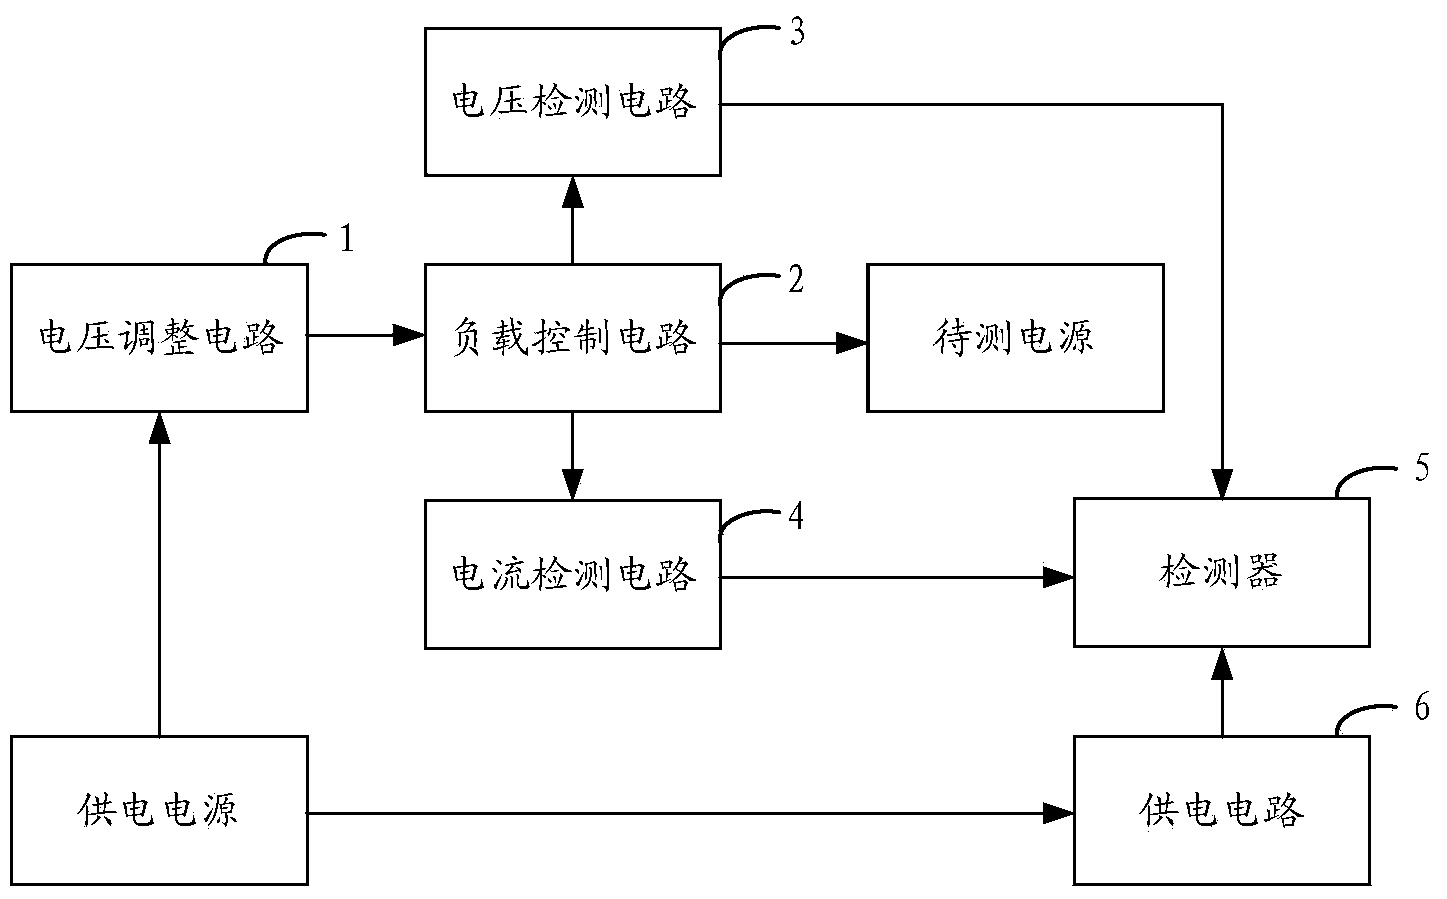 Load driving circuit and electronic load